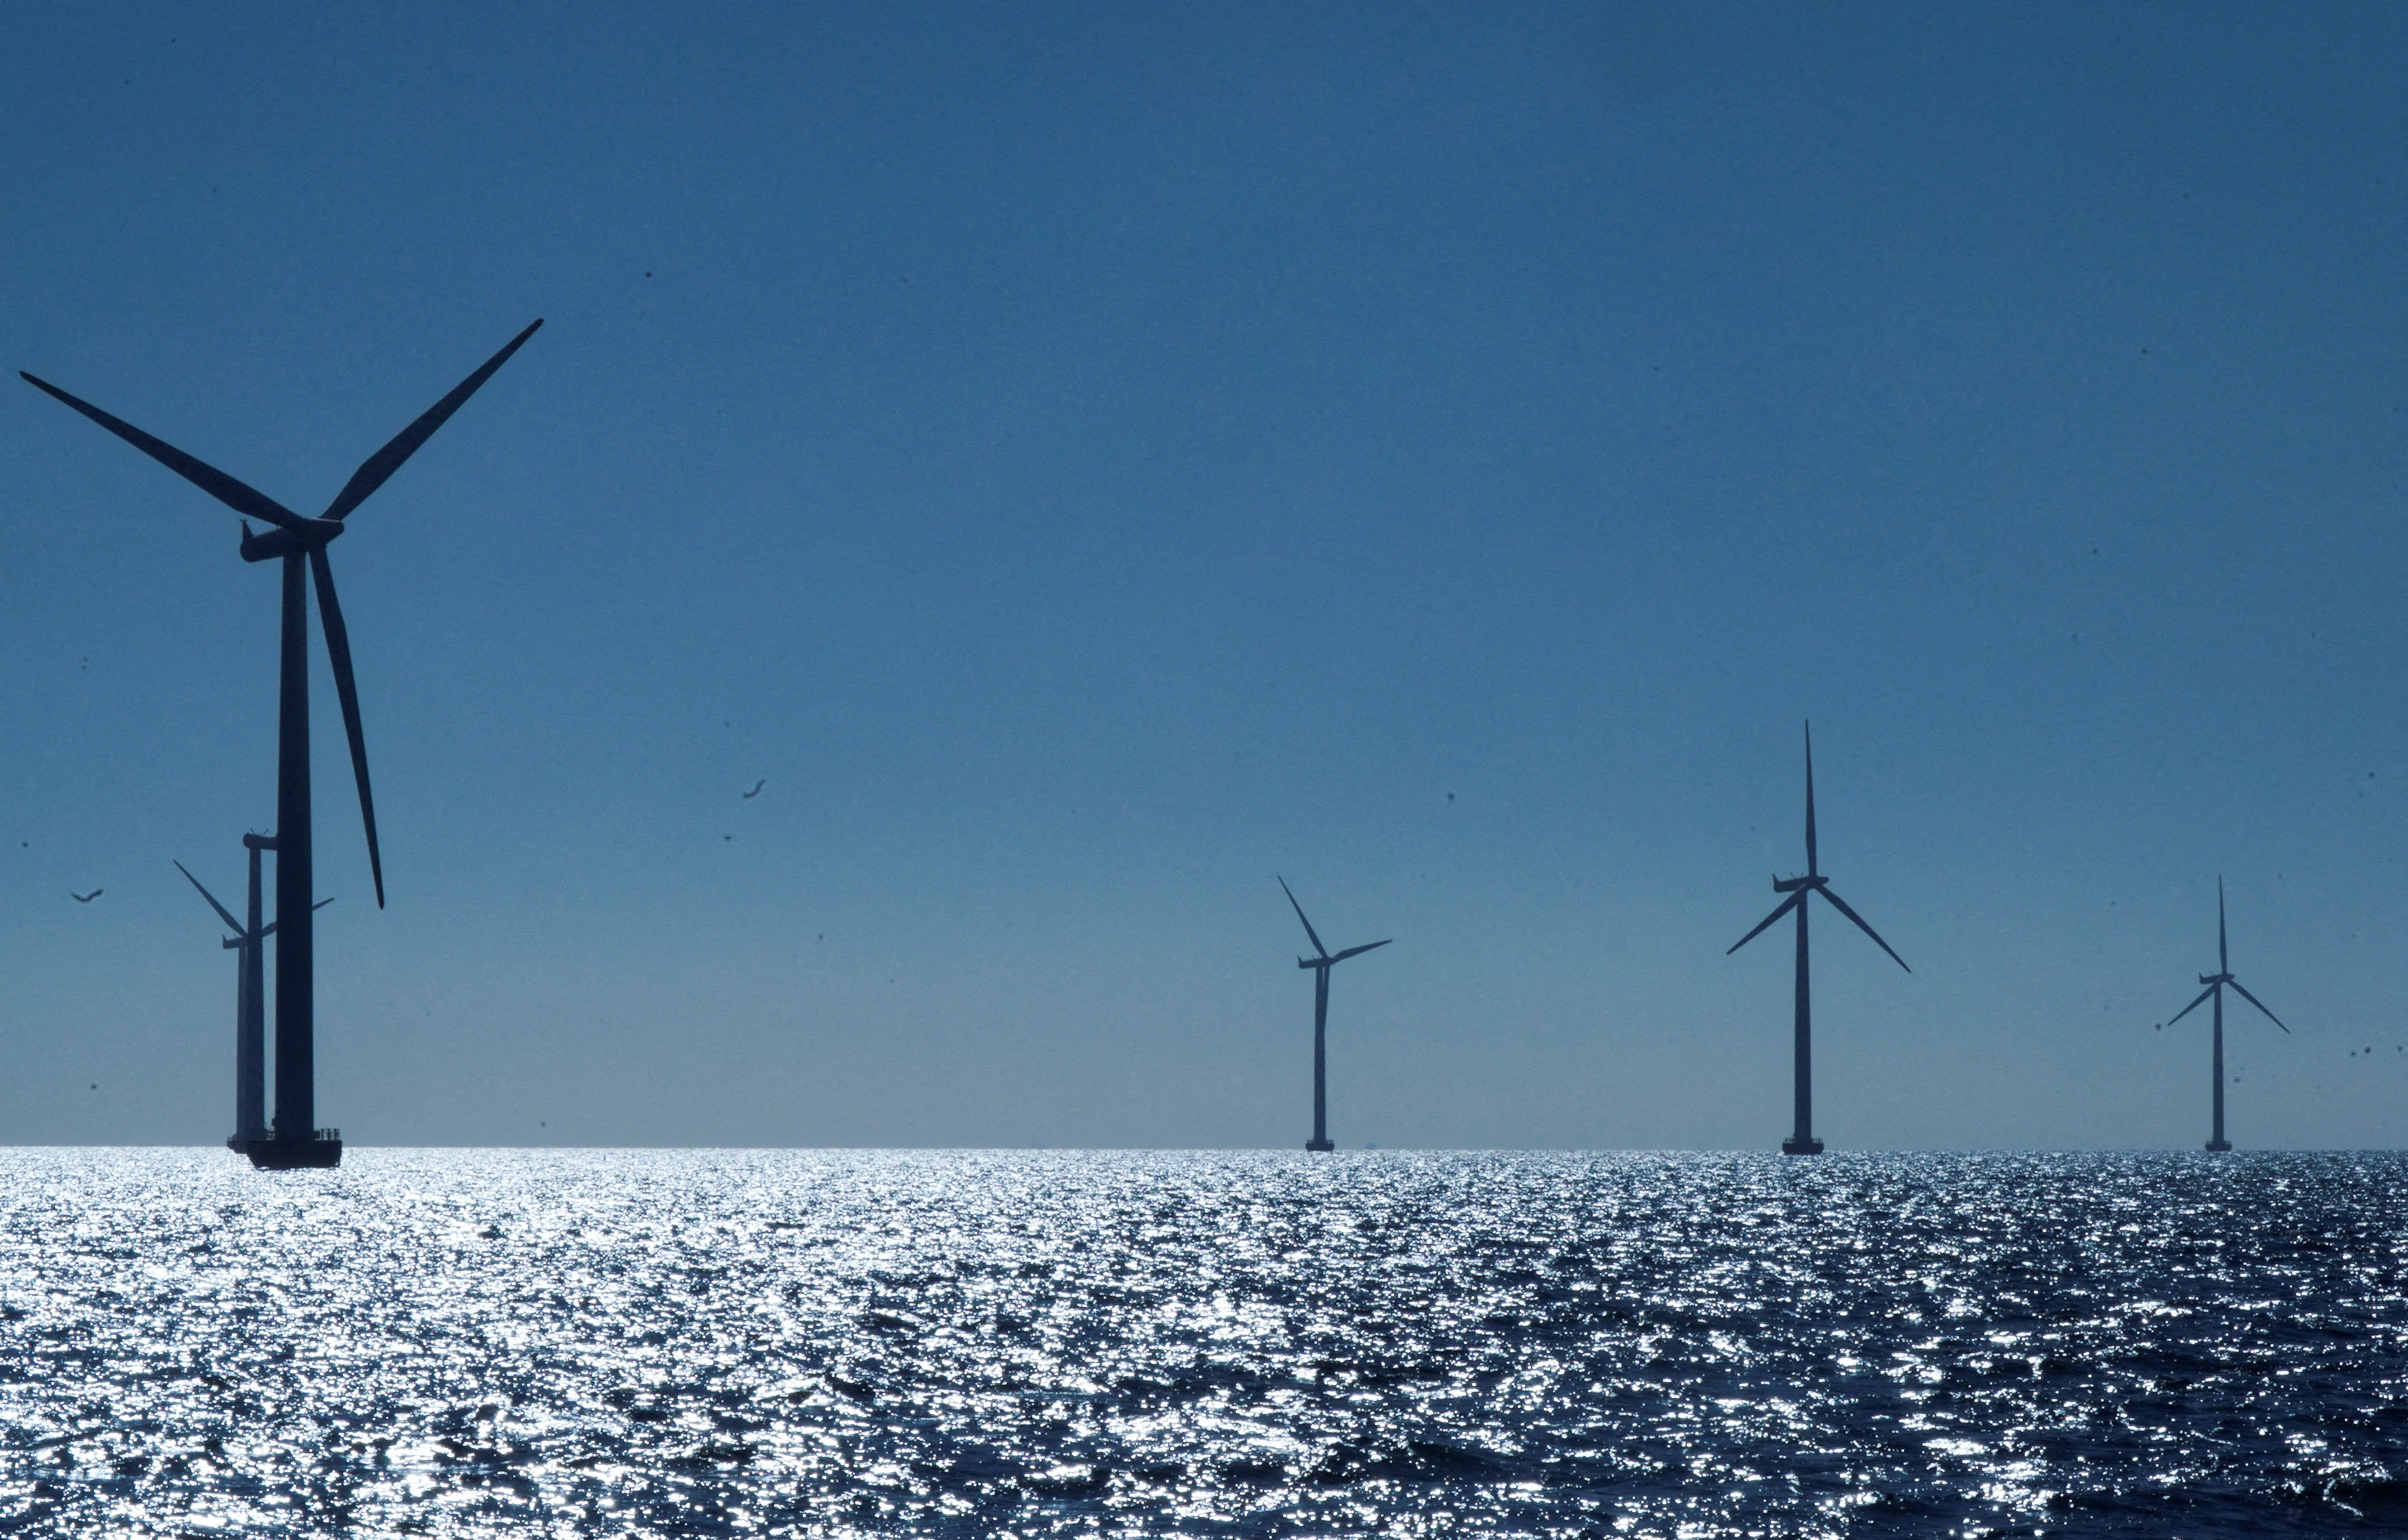 A view of the turbines at Orsted's offshore wind farm near Nysted